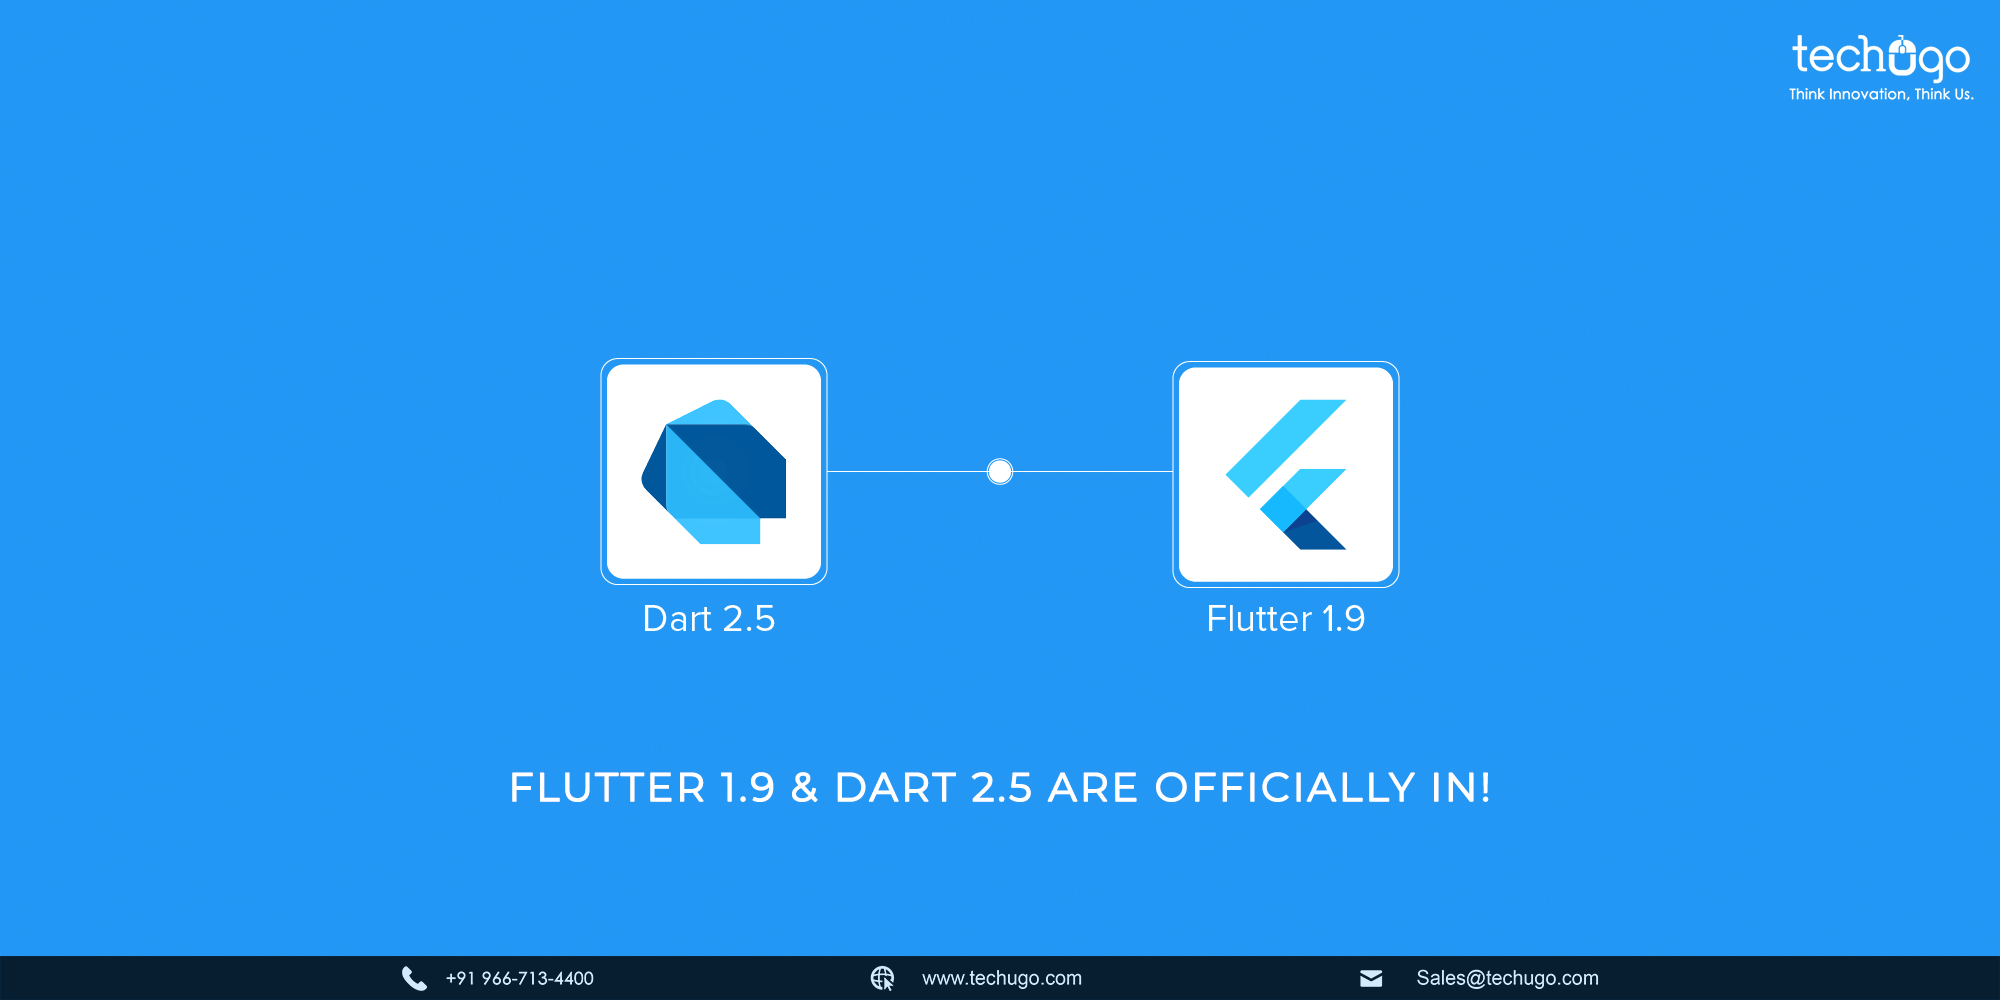 Flutter 1.9 & Dart 2.5 Are Officially InWhat You Should Not Miss